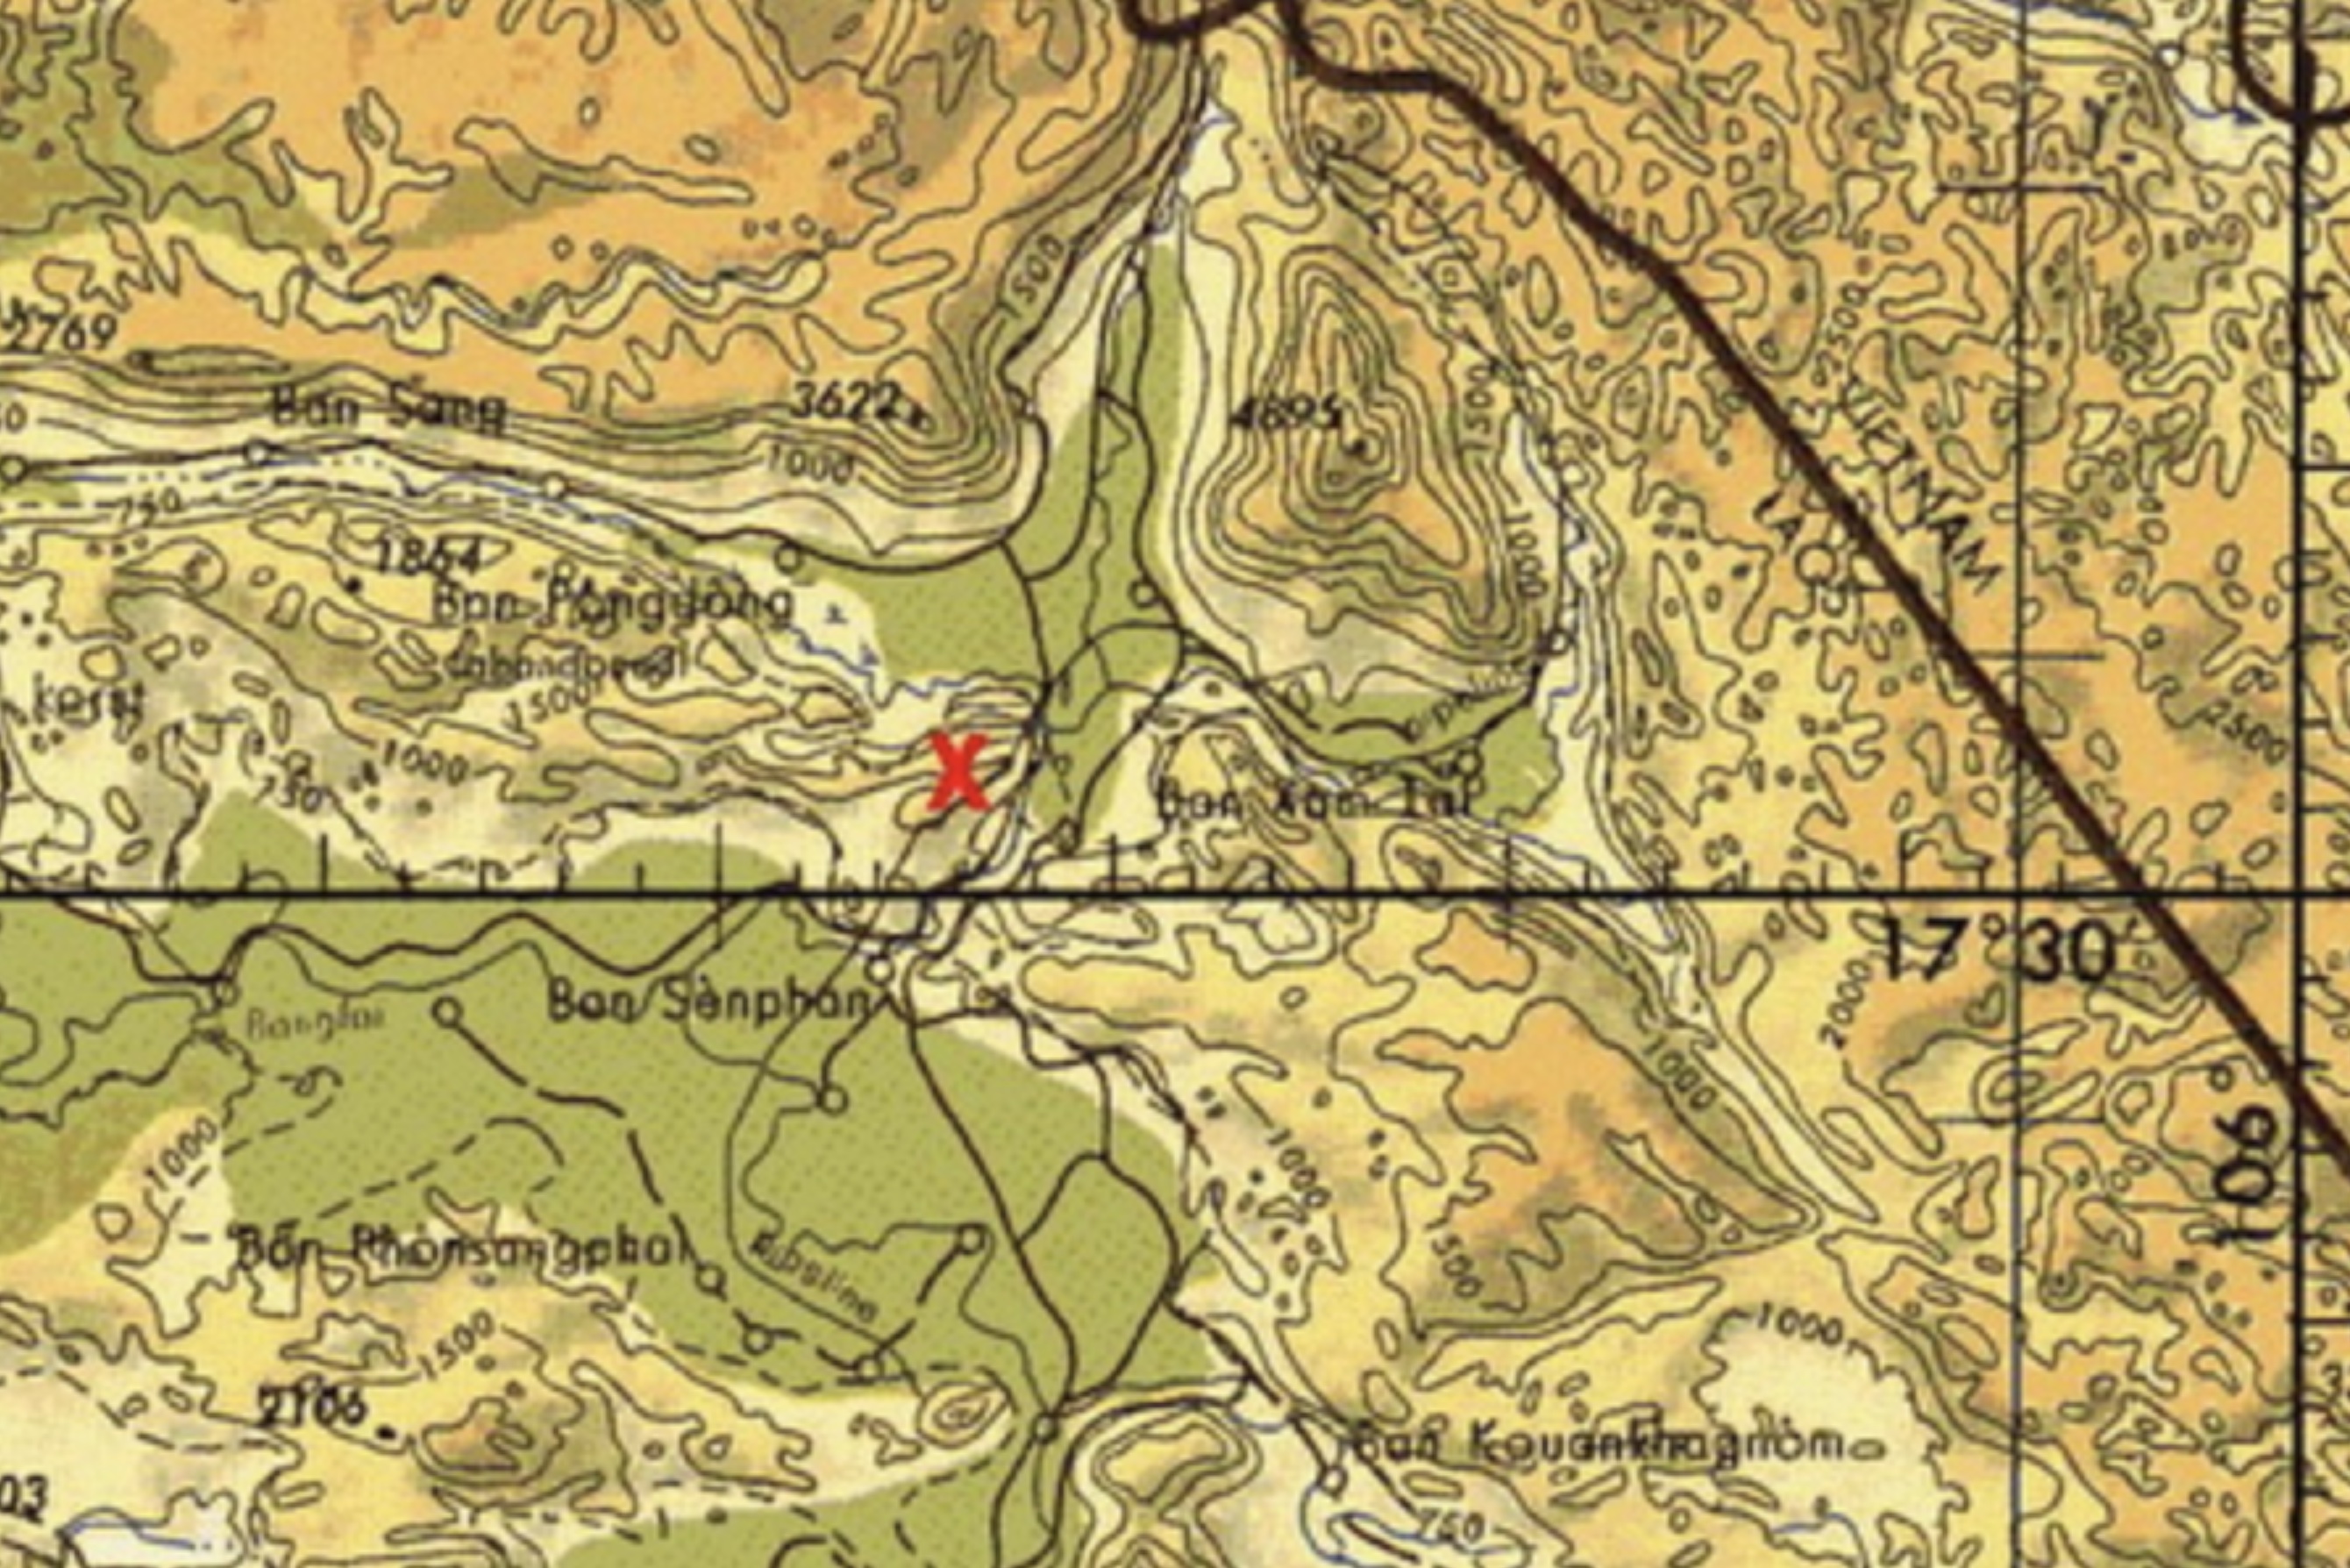 location of a pilot shot down over the Mu Gia pass